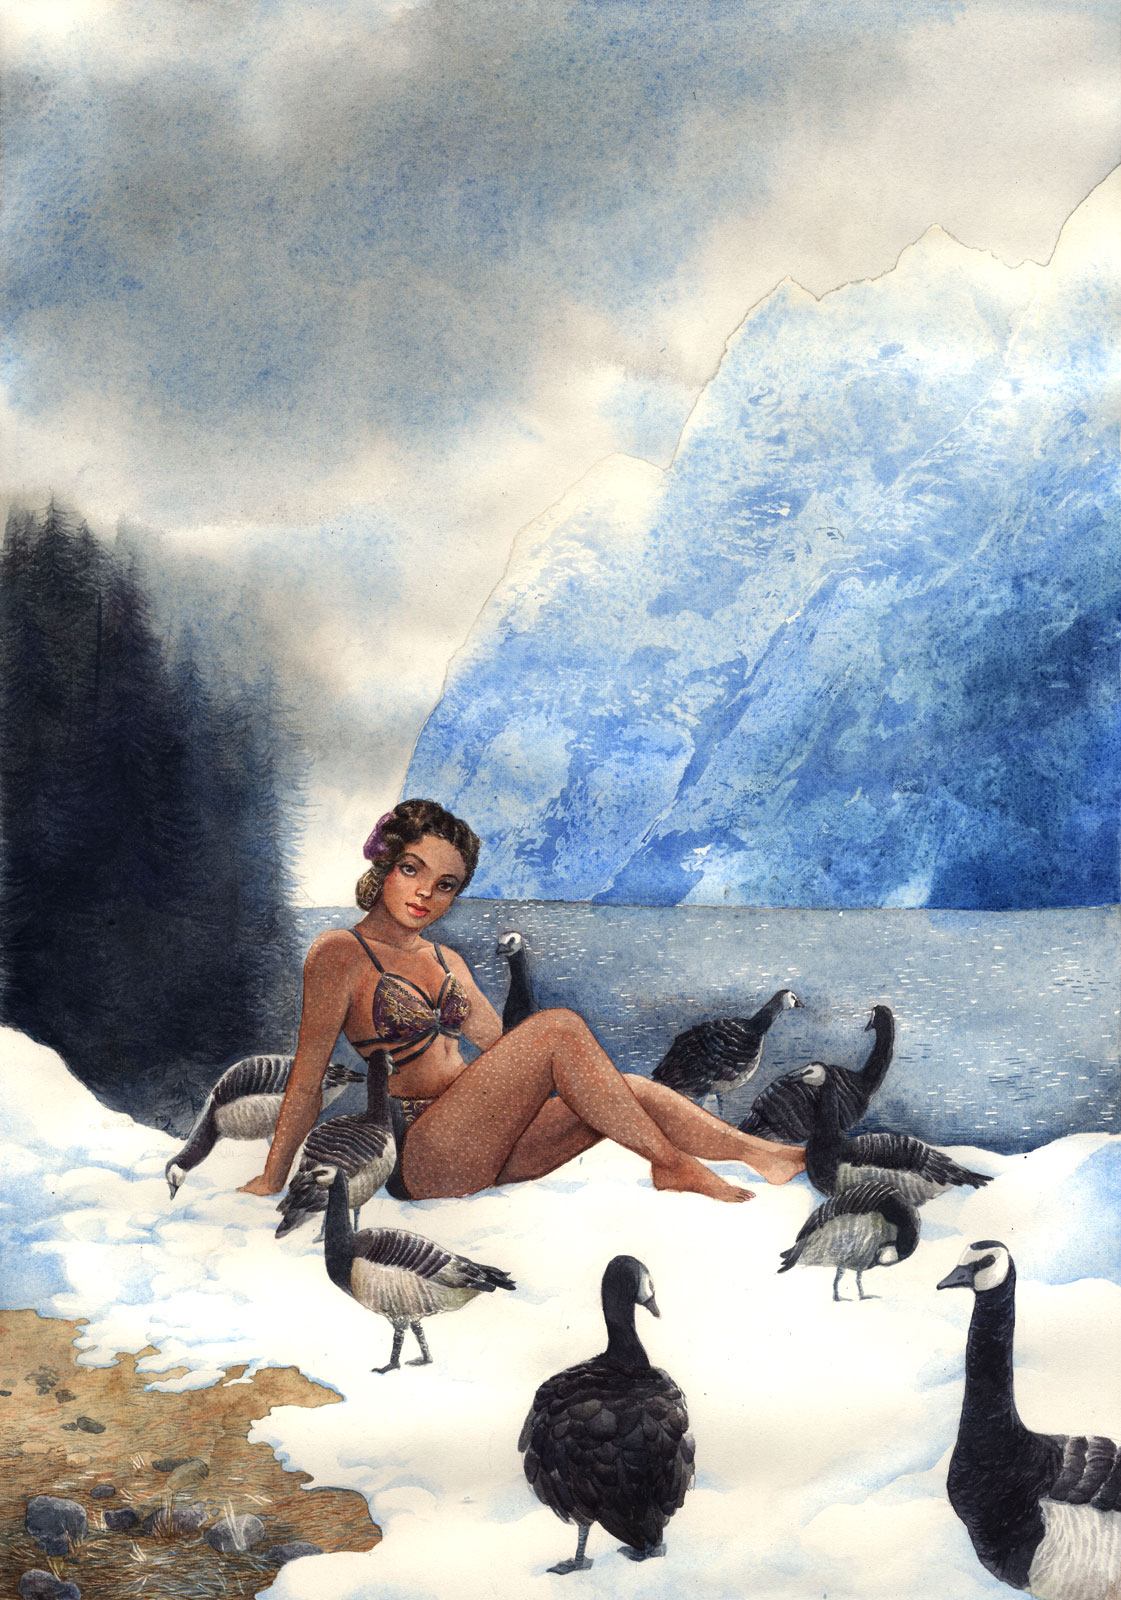 A black pinup posing by a lake in the moutains with realistic goosebumps on her skin and actual gooses frolicking in the snow.